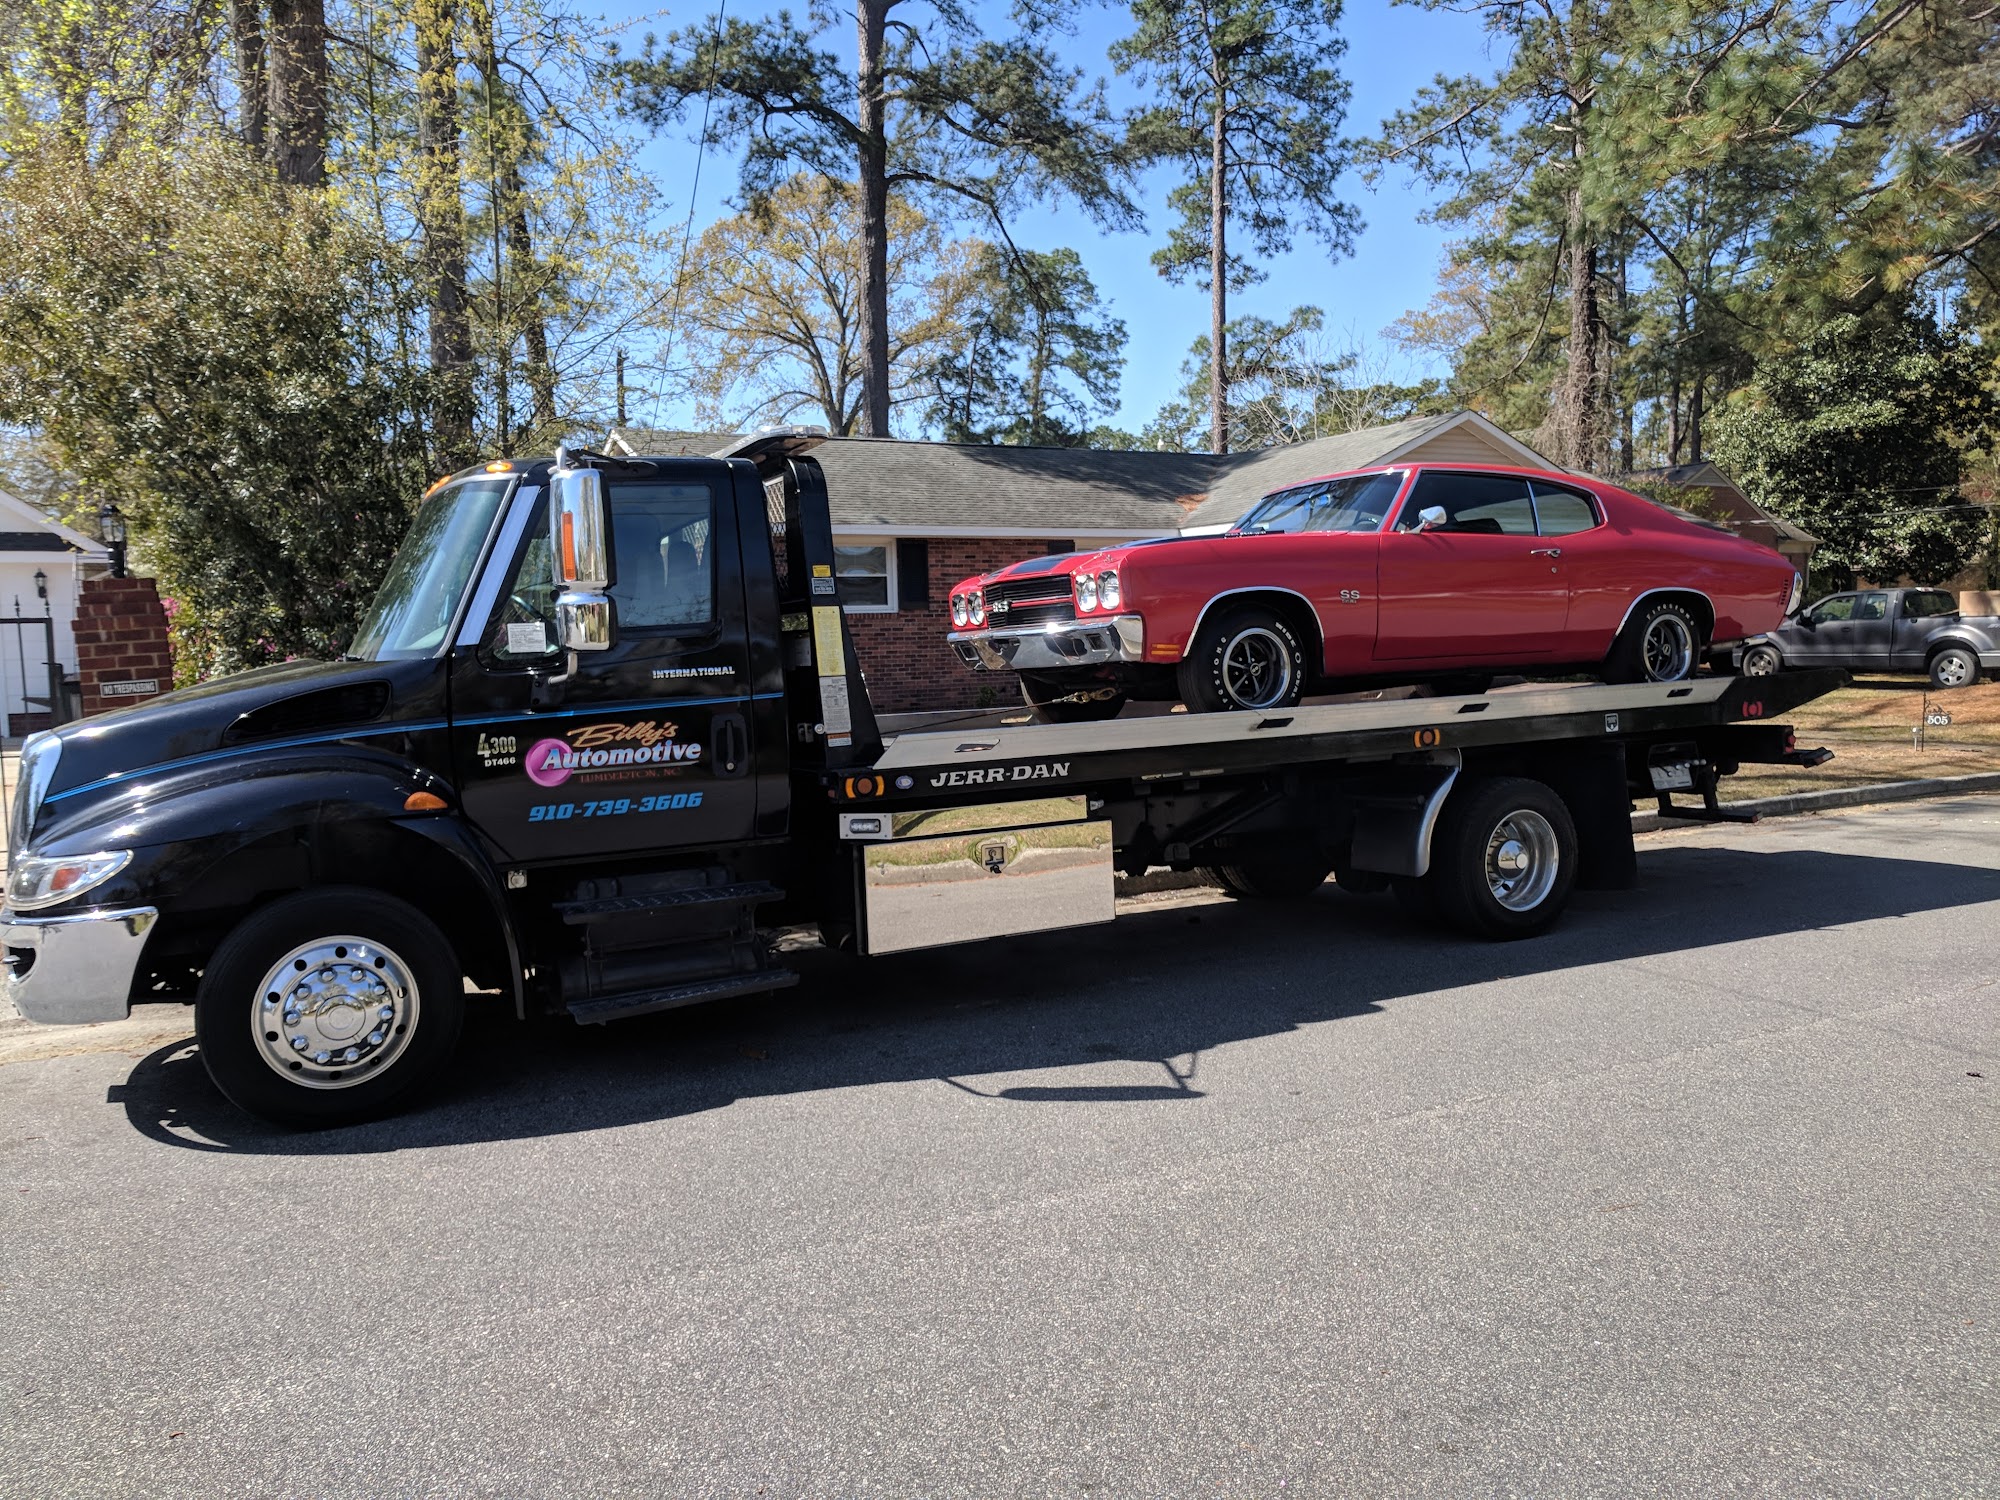 Billy's Automotive & Towing